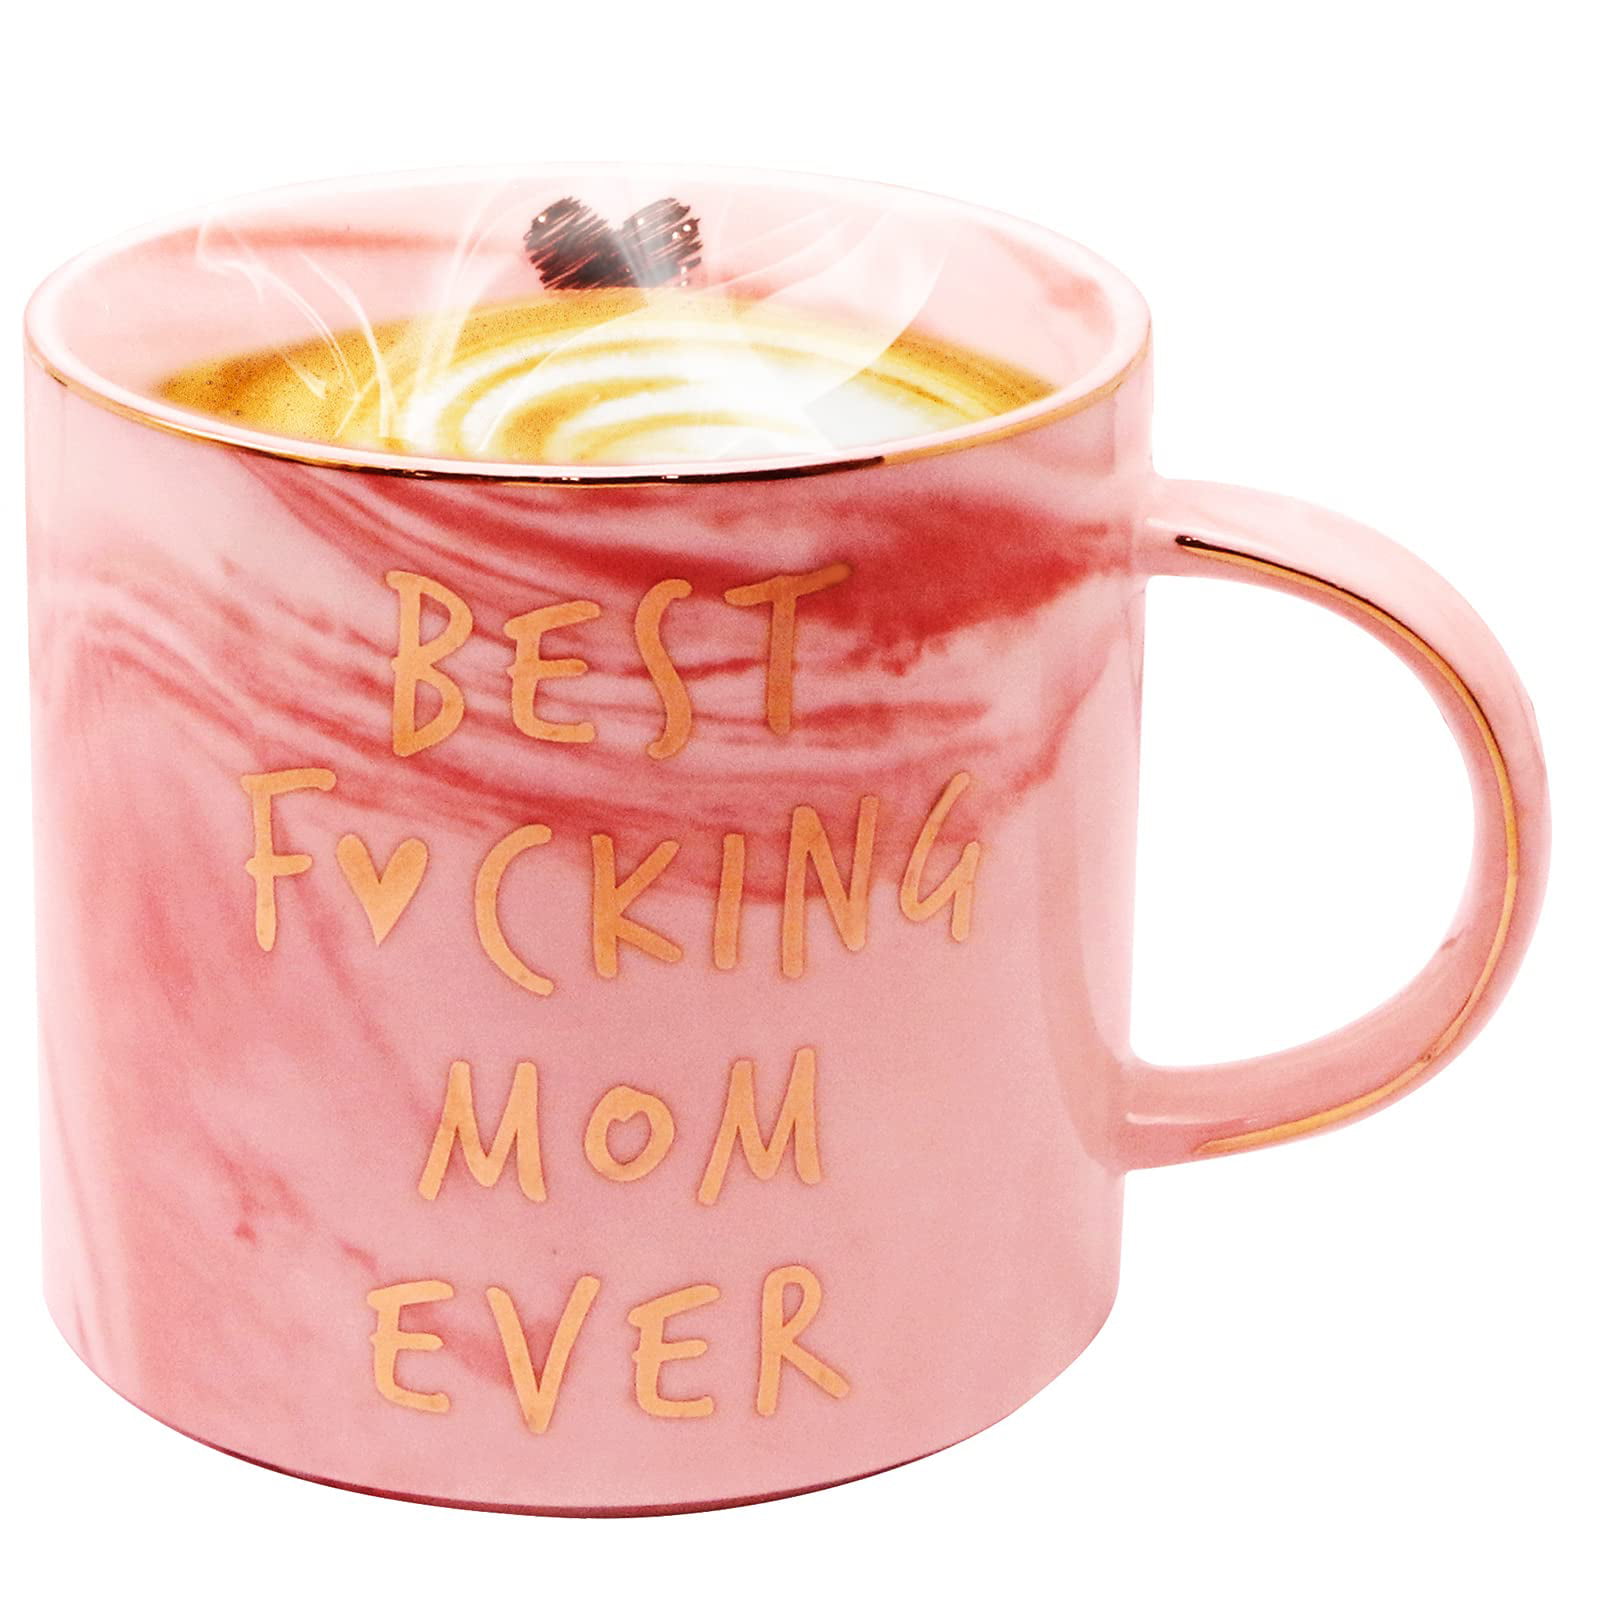 Best Mom Mug Mothers Day Gifts for Mom Gifts from Daughter Son Kids, Funny  Mom Birthday Gifts Mom Mo…See more Best Mom Mug Mothers Day Gifts for Mom